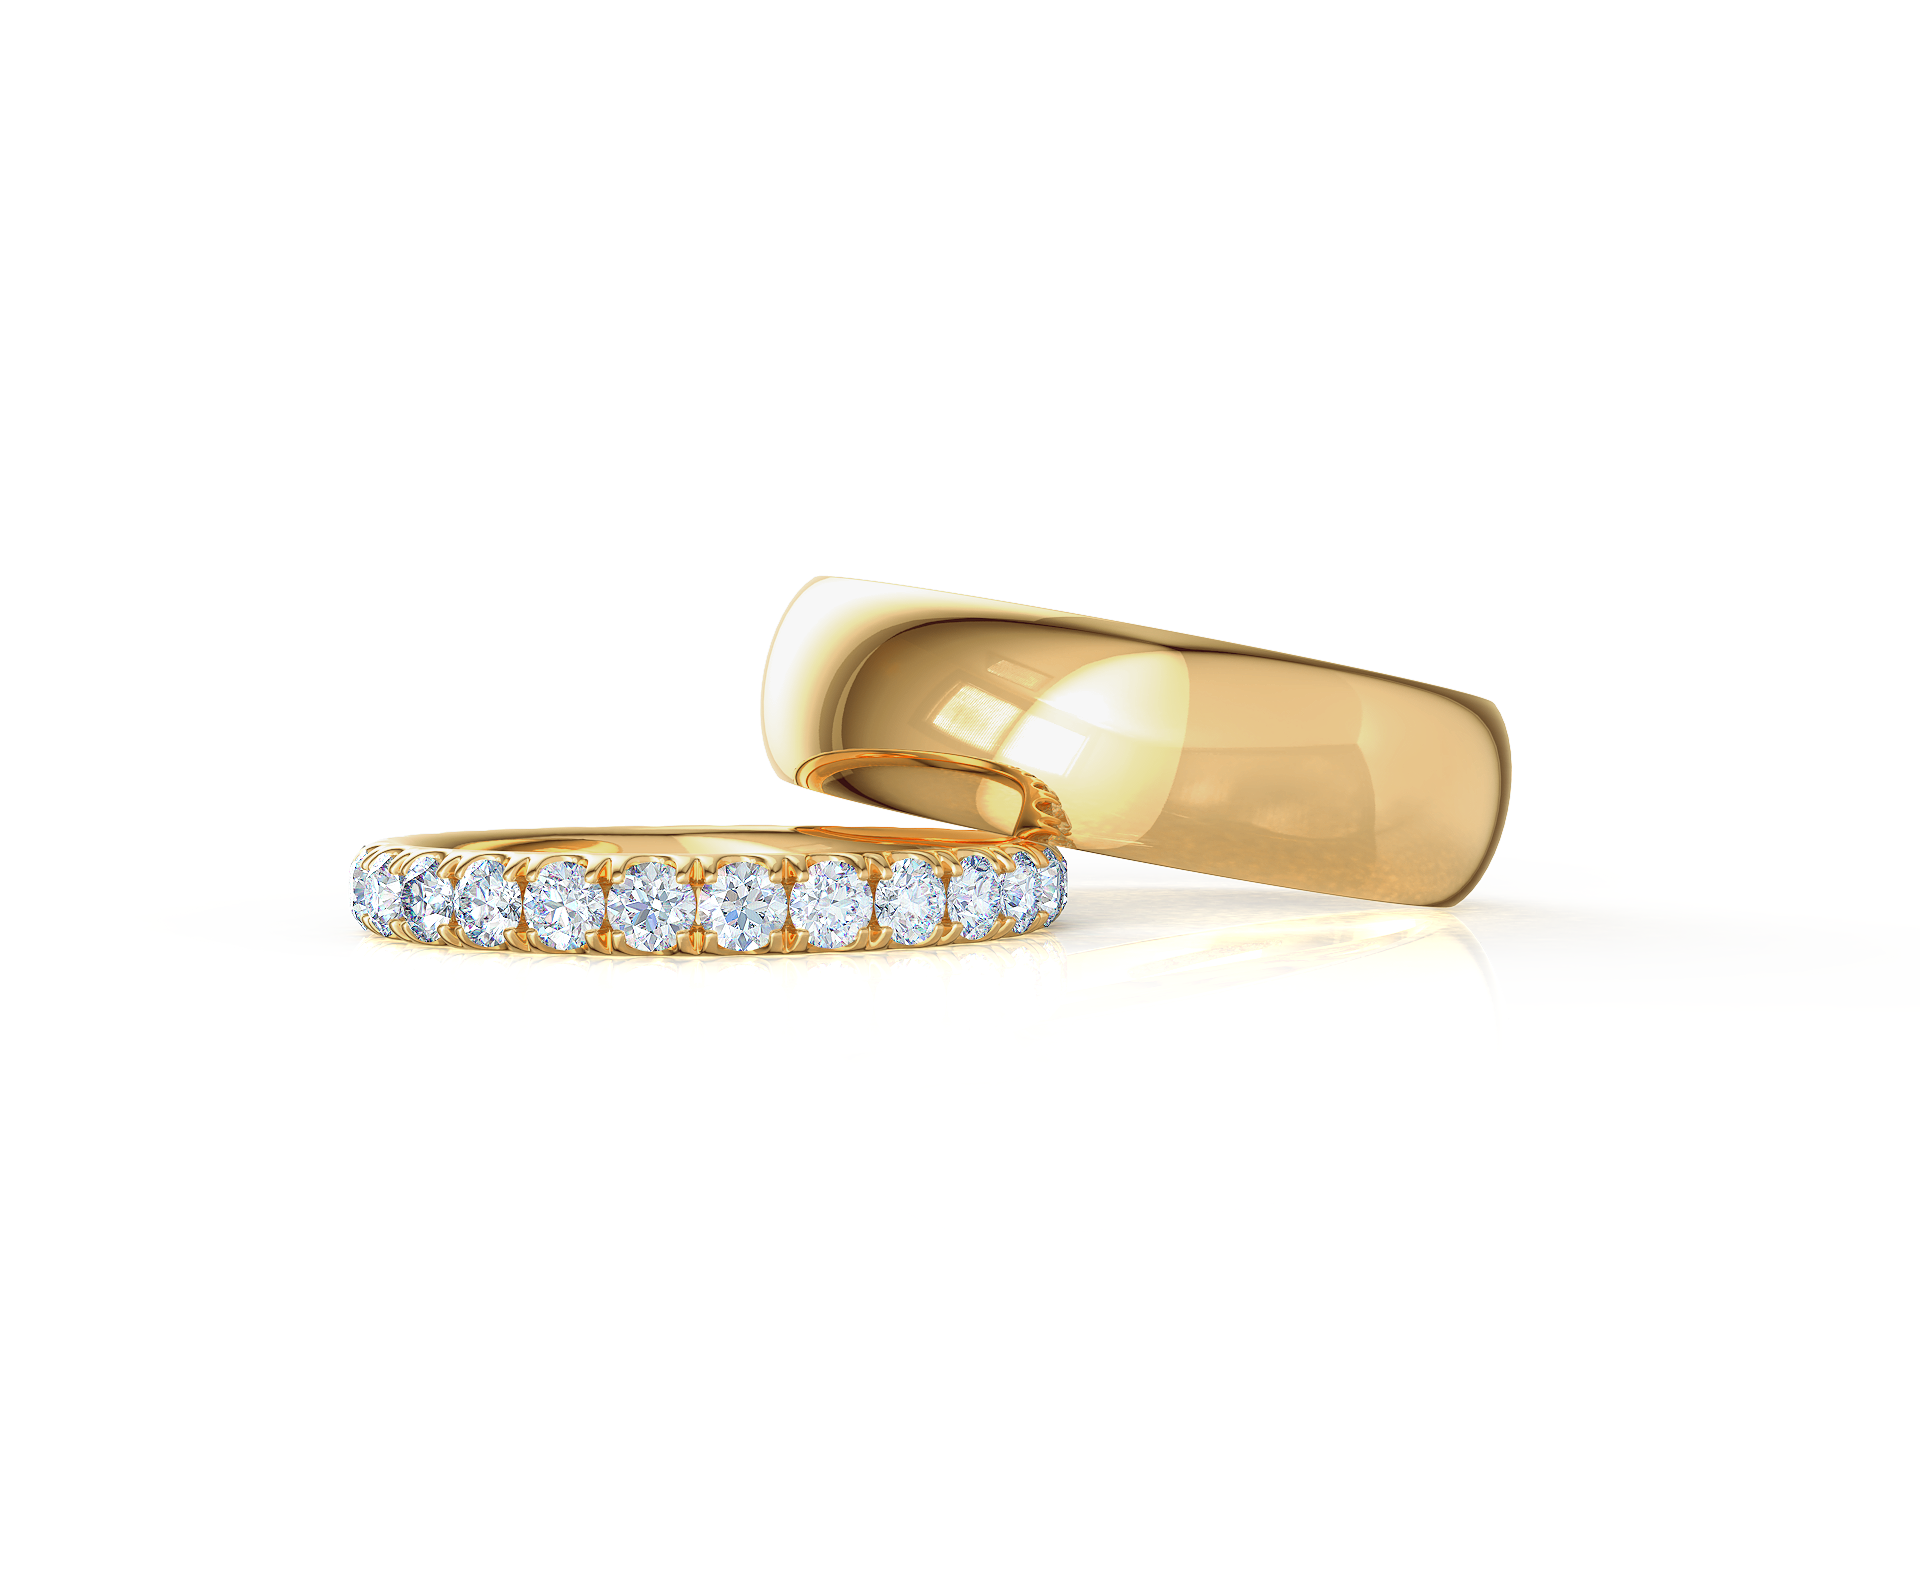  Pair your U Pavé Eternity Band with a Classic Rounded Ring    Shop Now   